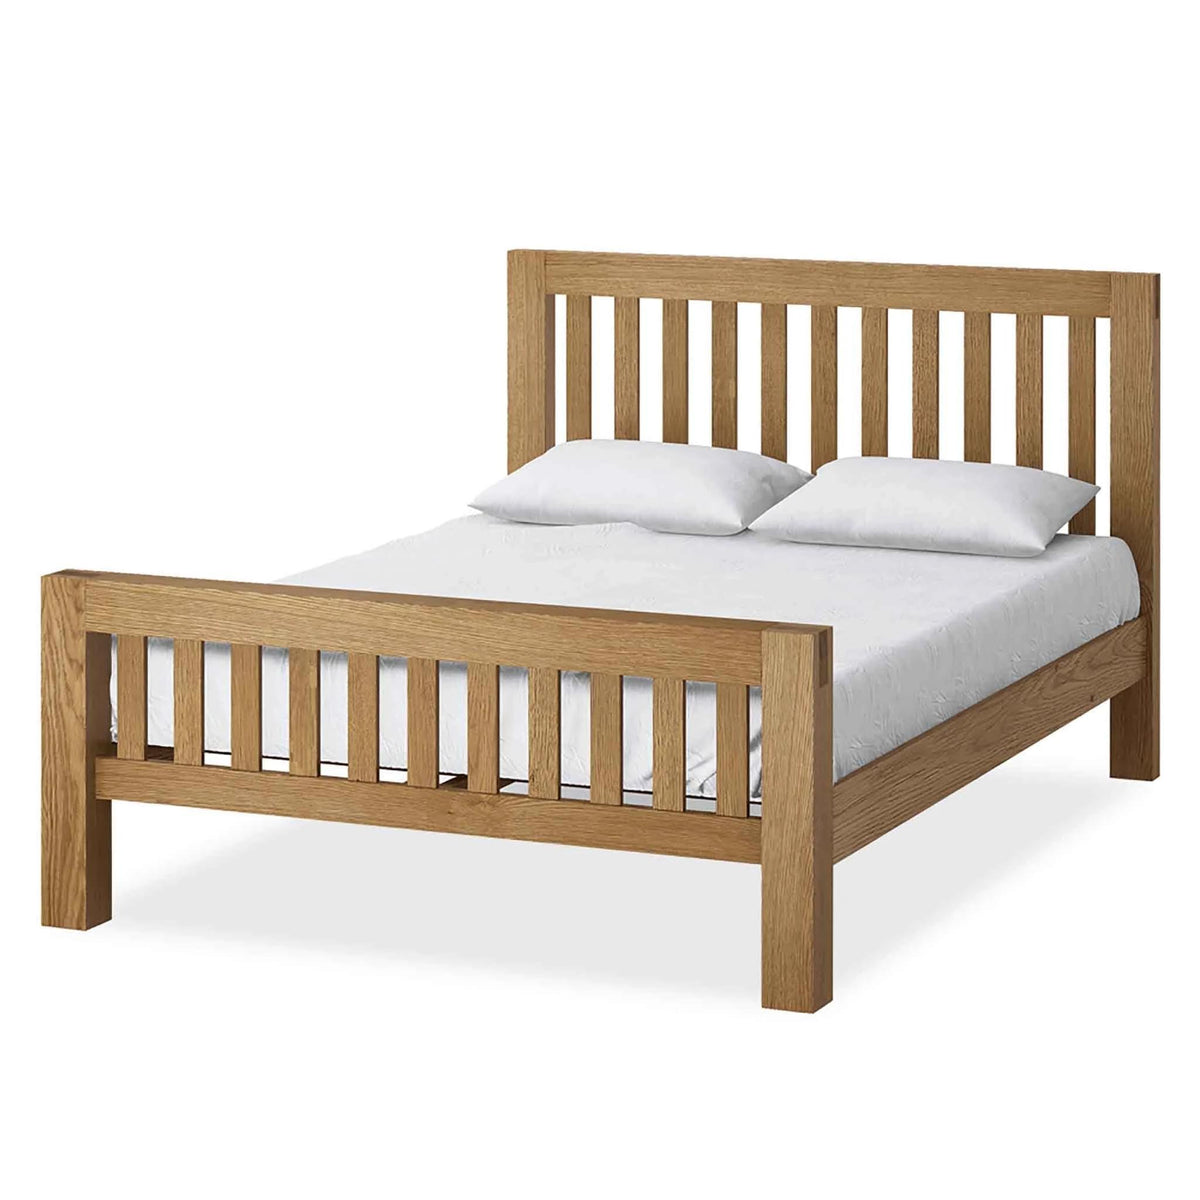 The Abbey Grande Wooden Oak Bed Frame Double or King Size from Roseland Furniture